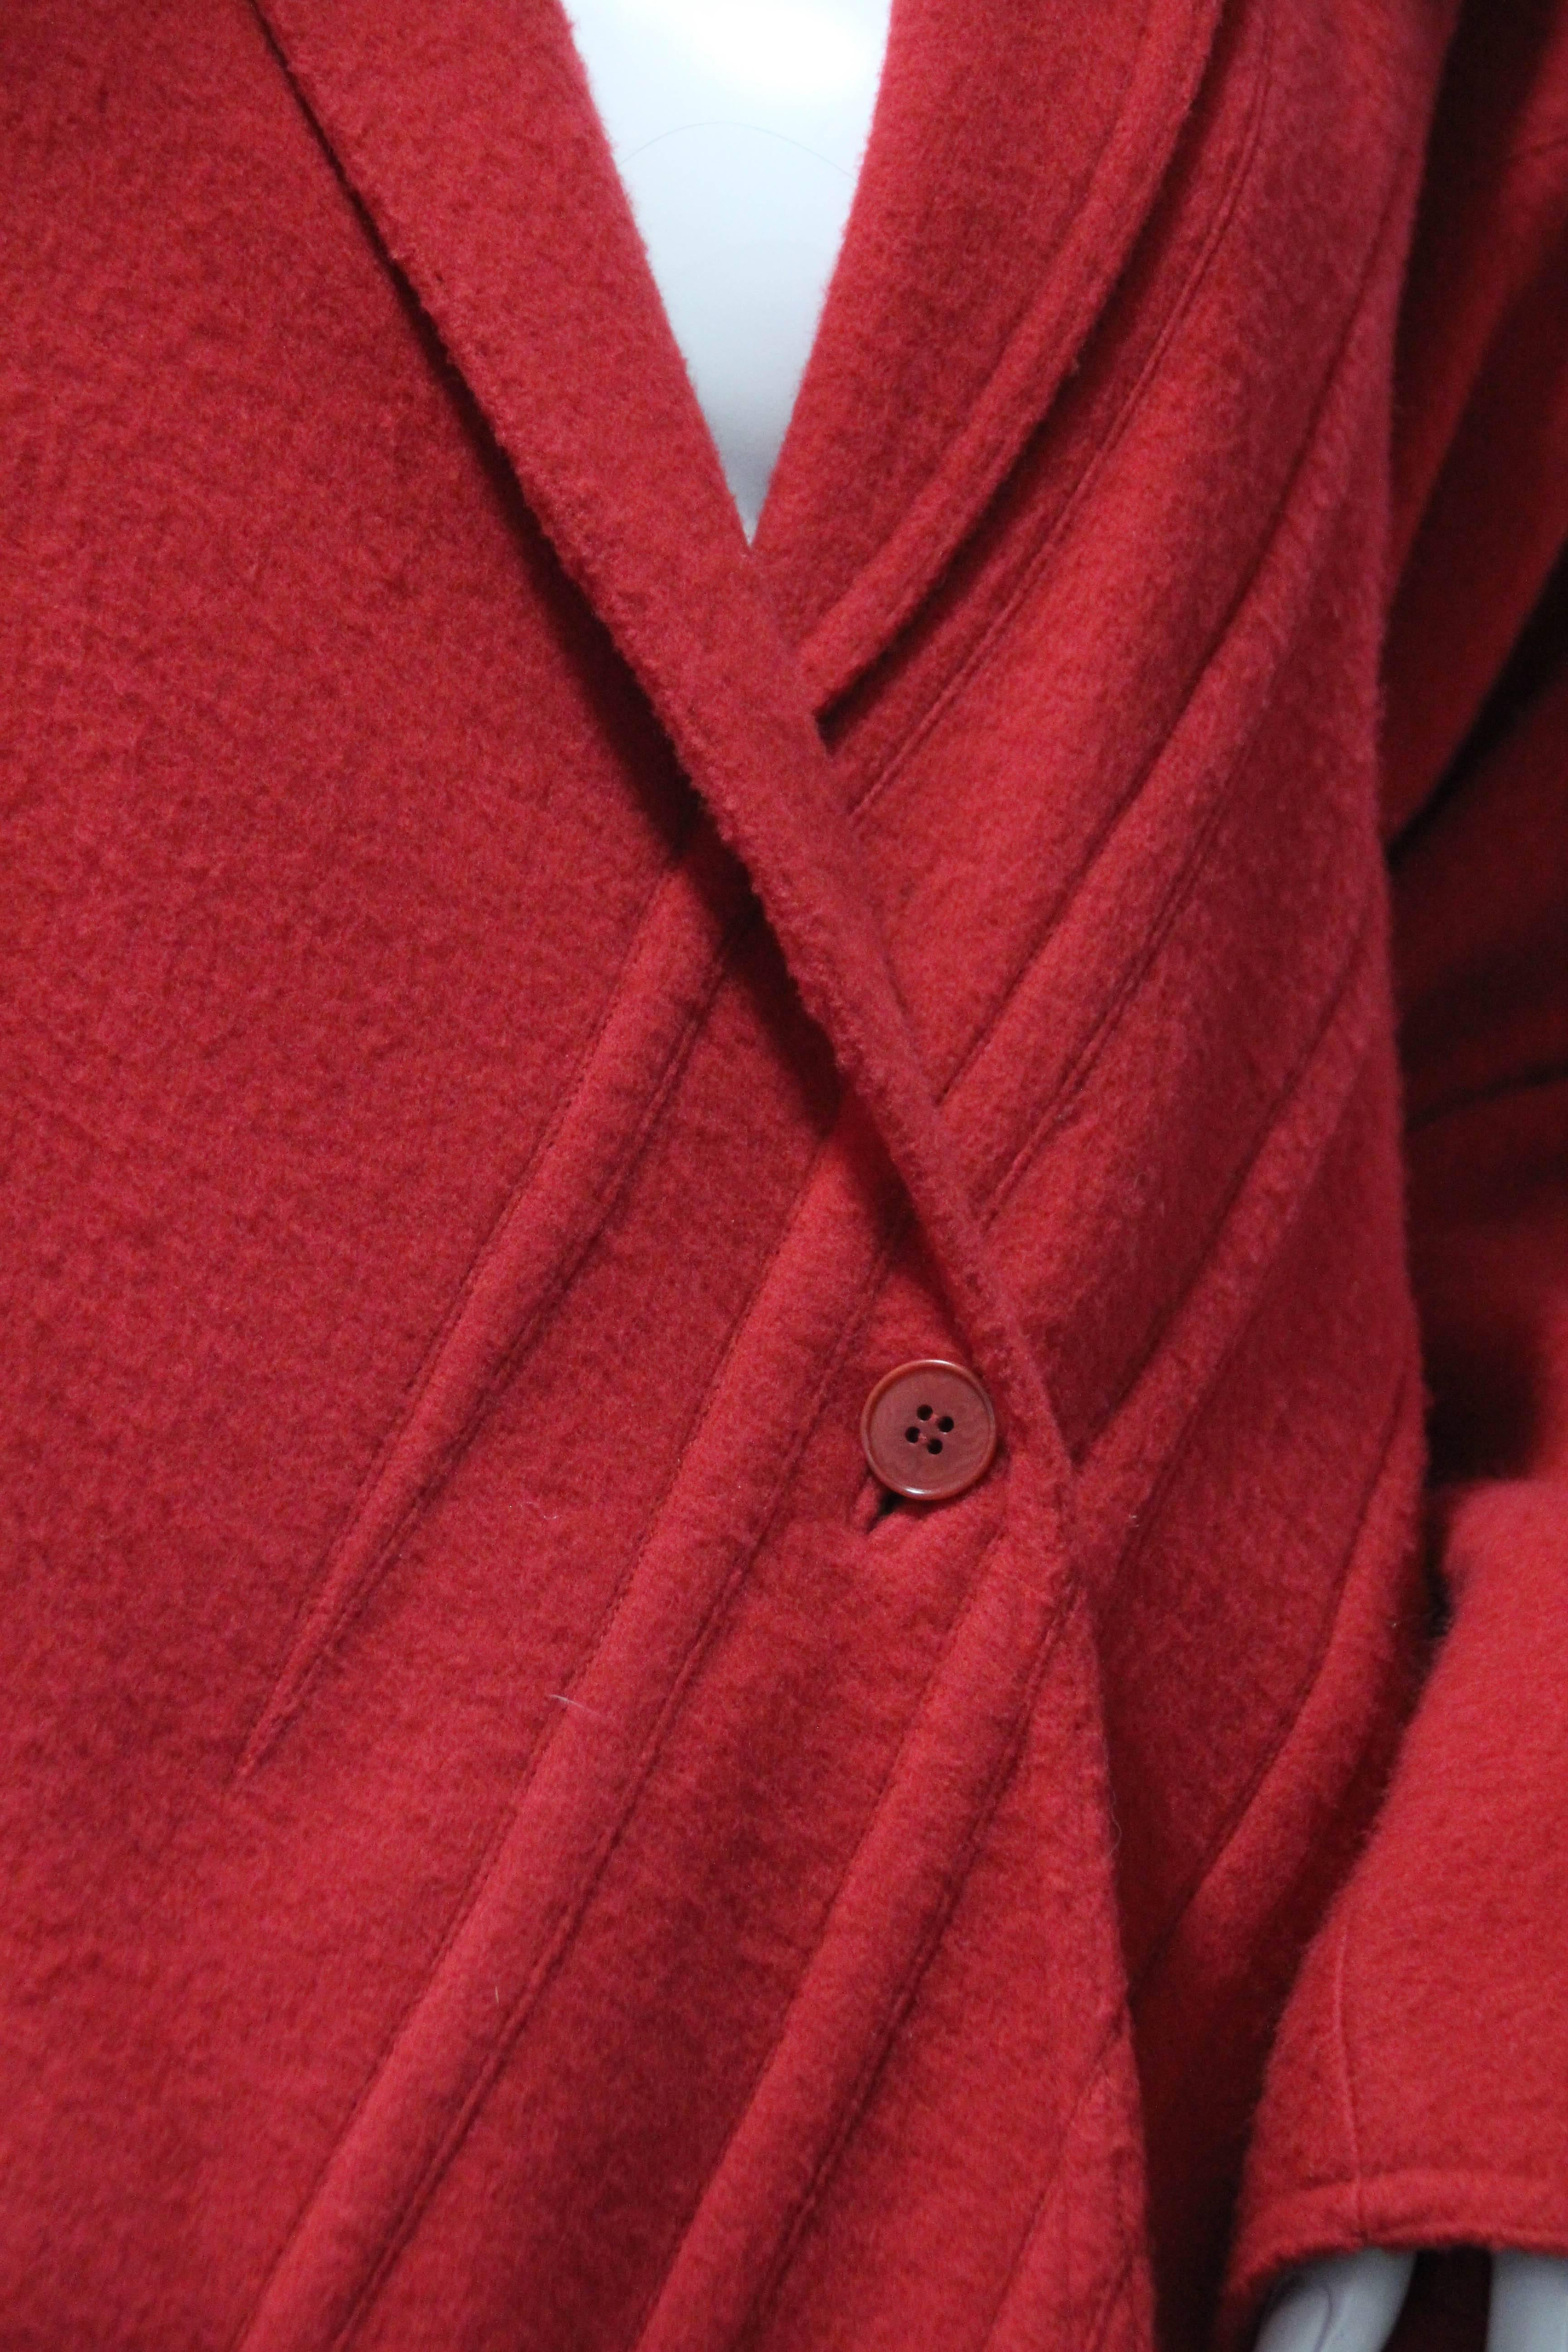 1980s Gianni Versace Primary Red Wool Coat w Angular Trapunto Stitching Details For Sale 2